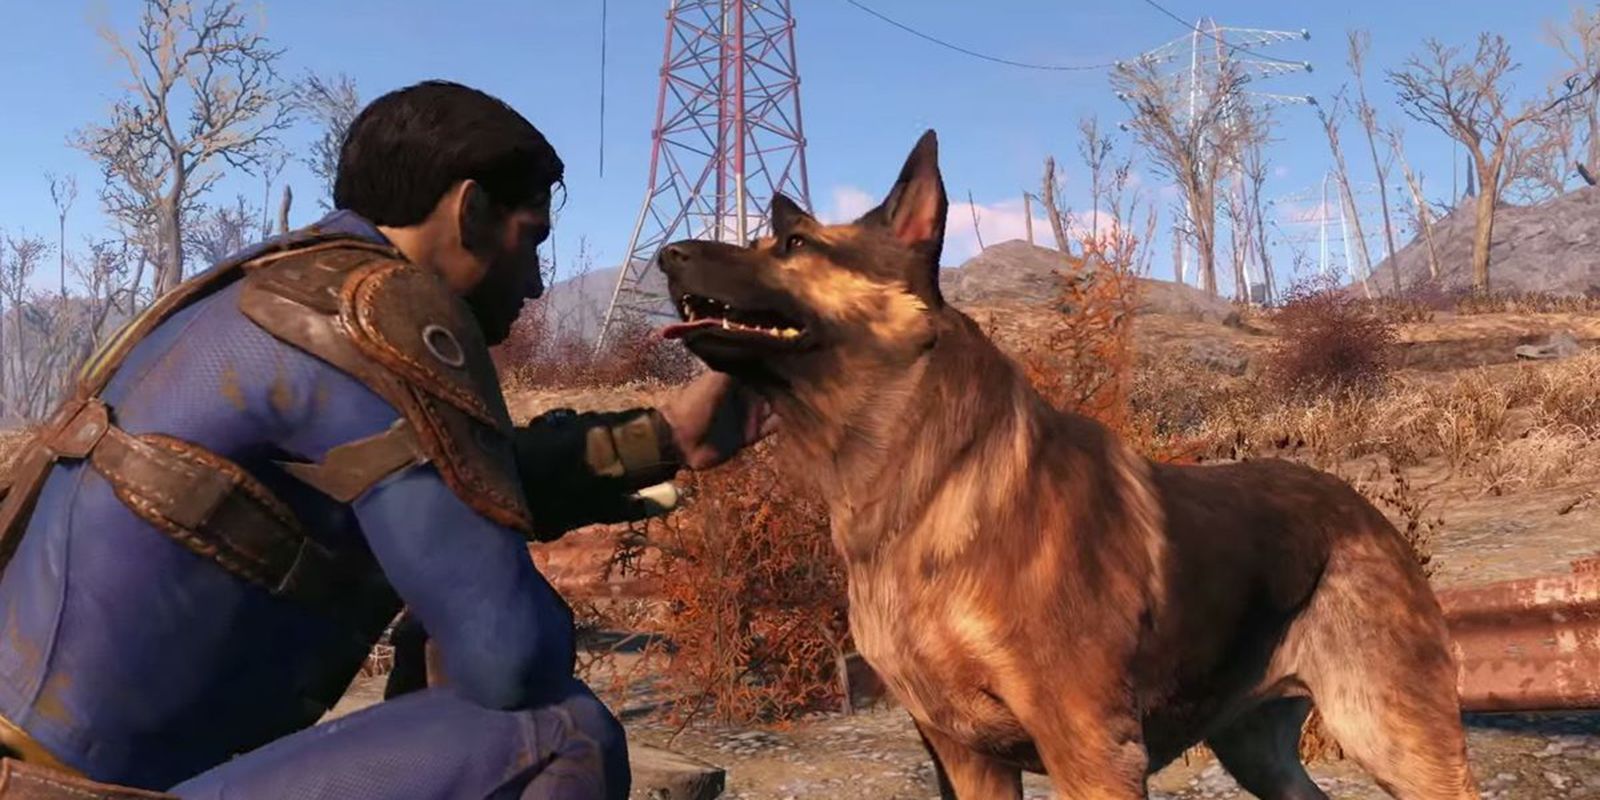 Fallout 4 player stroking the Dogmeat